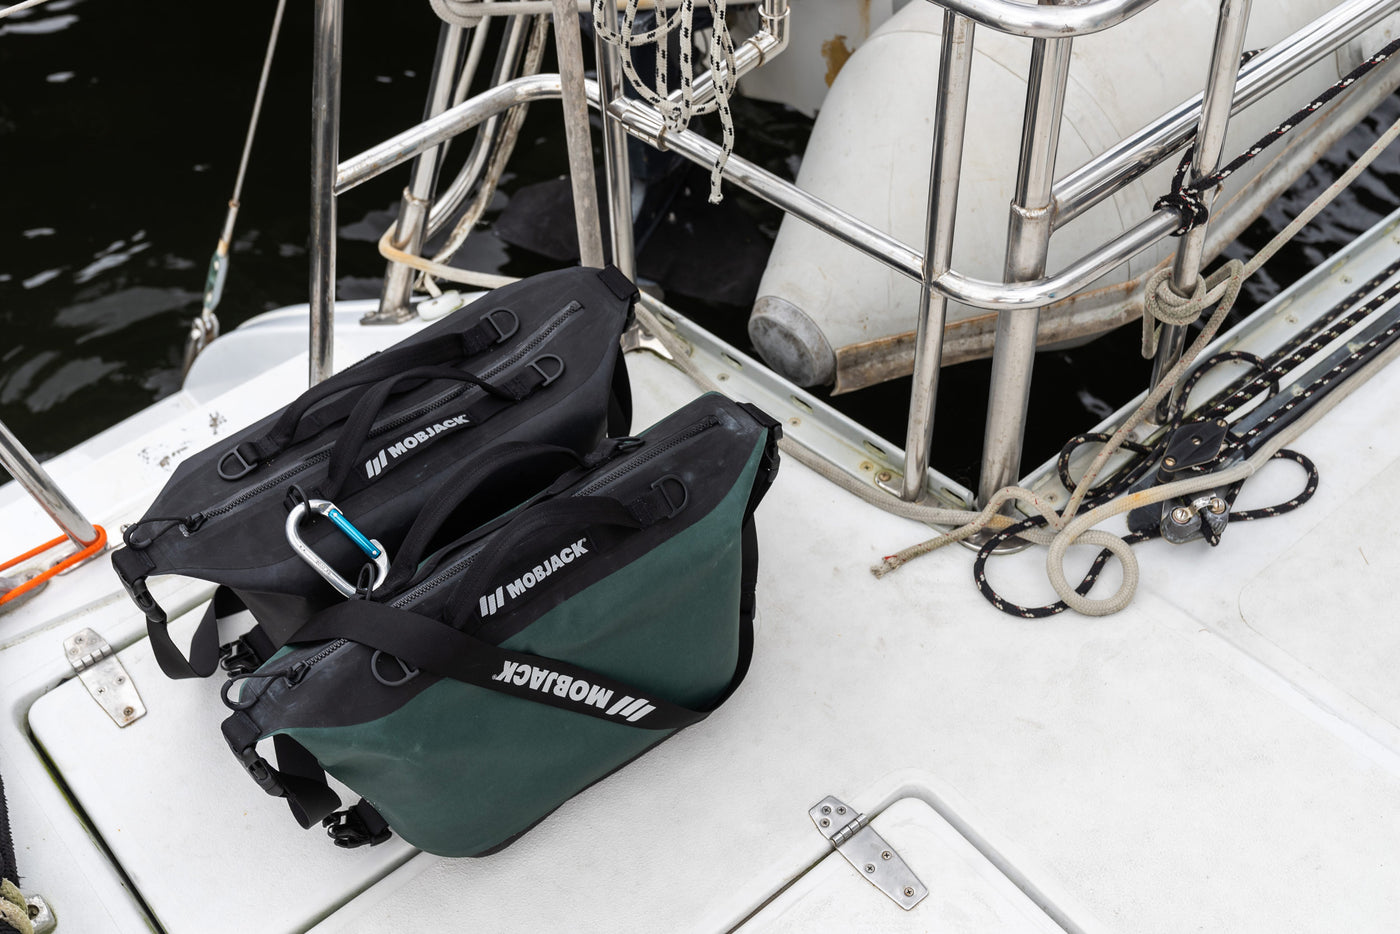 two mobjack captains bags sitting on boat